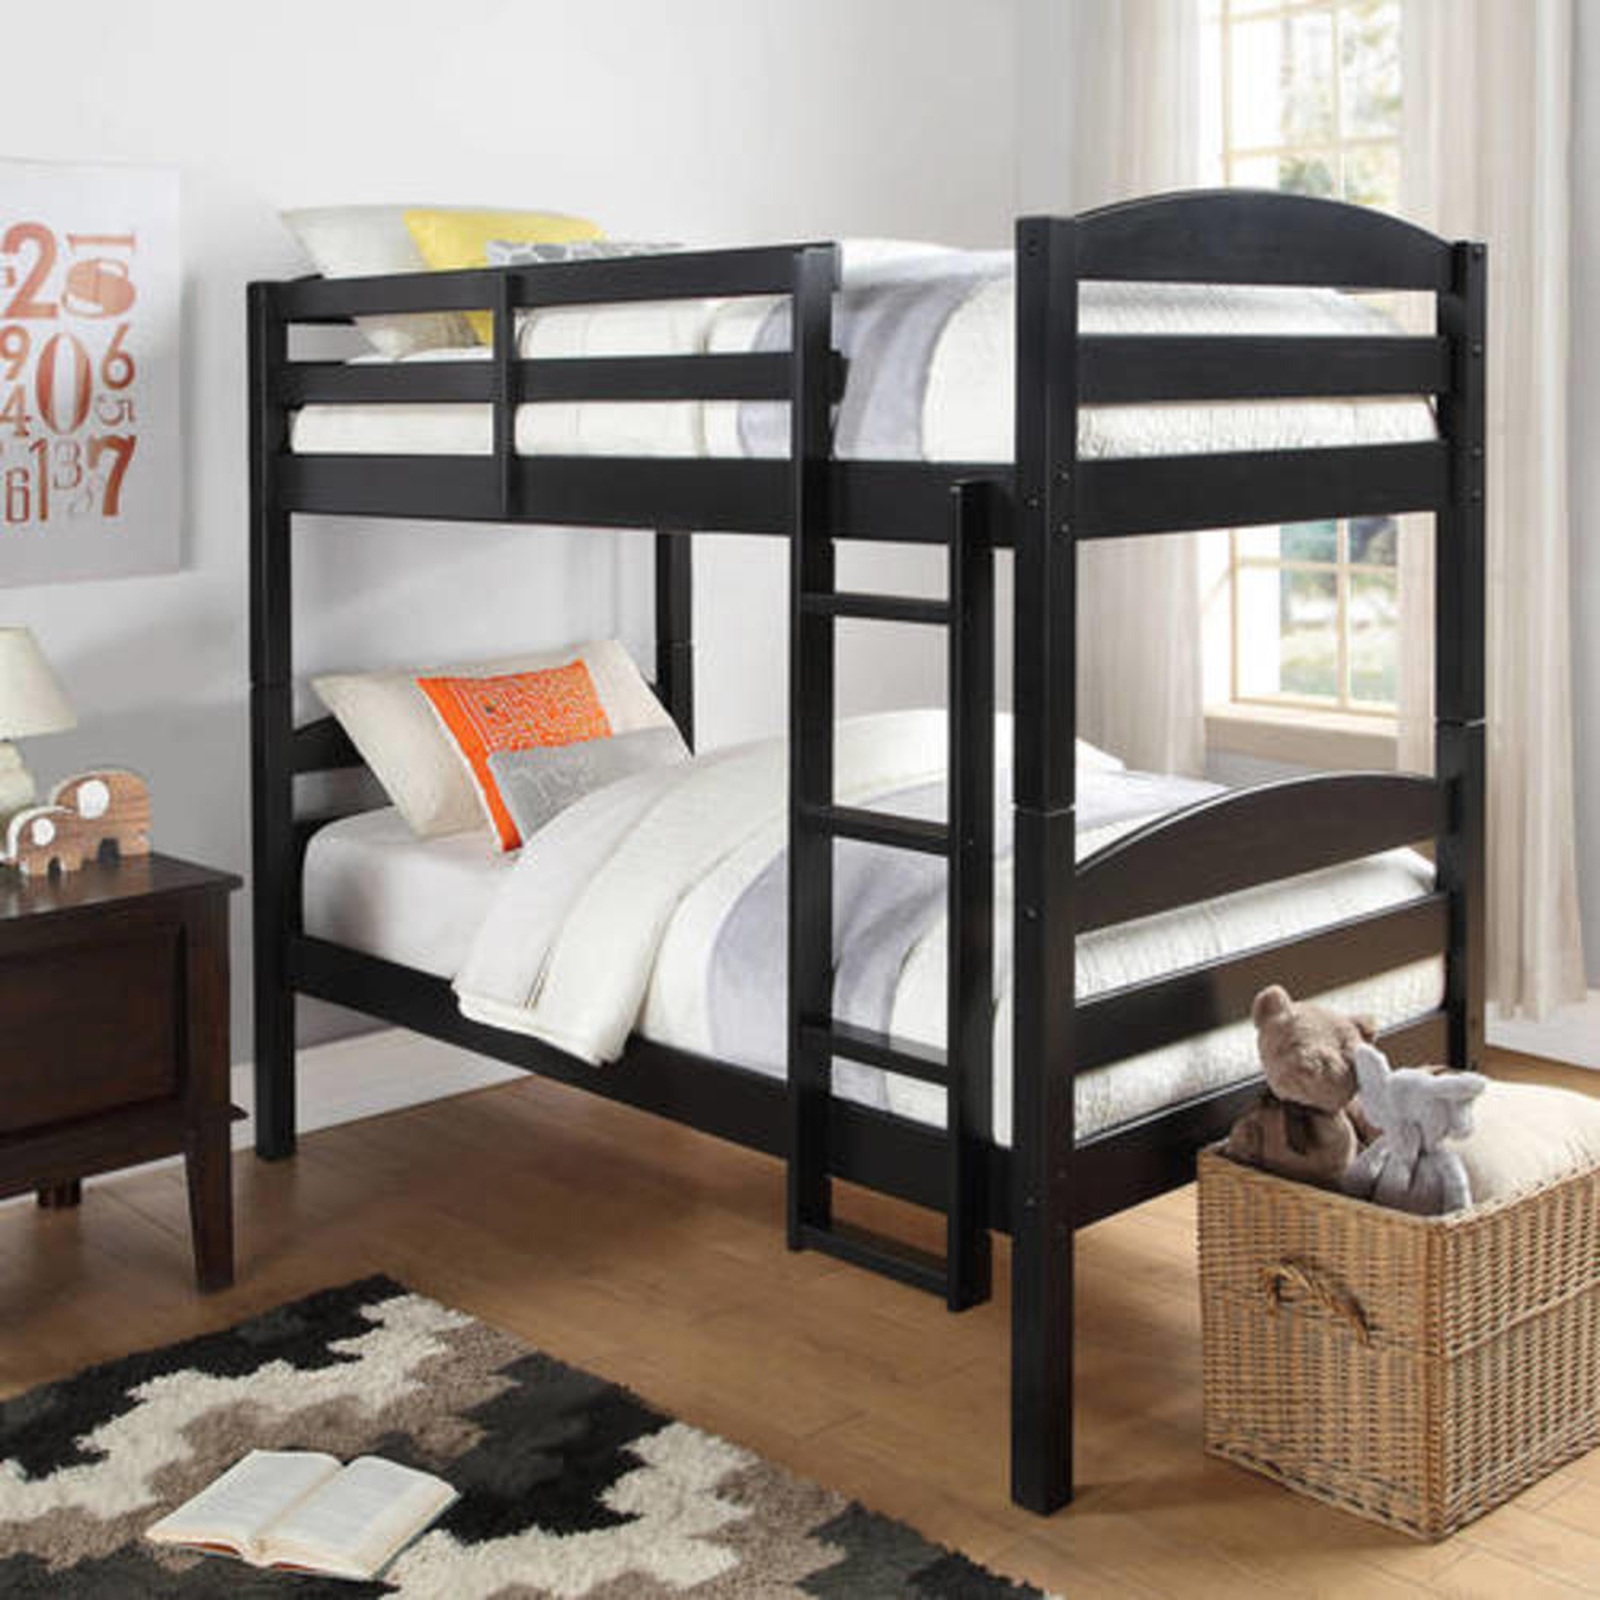 Gardens Twin Over Bunk Bed, Sears Bunk Beds